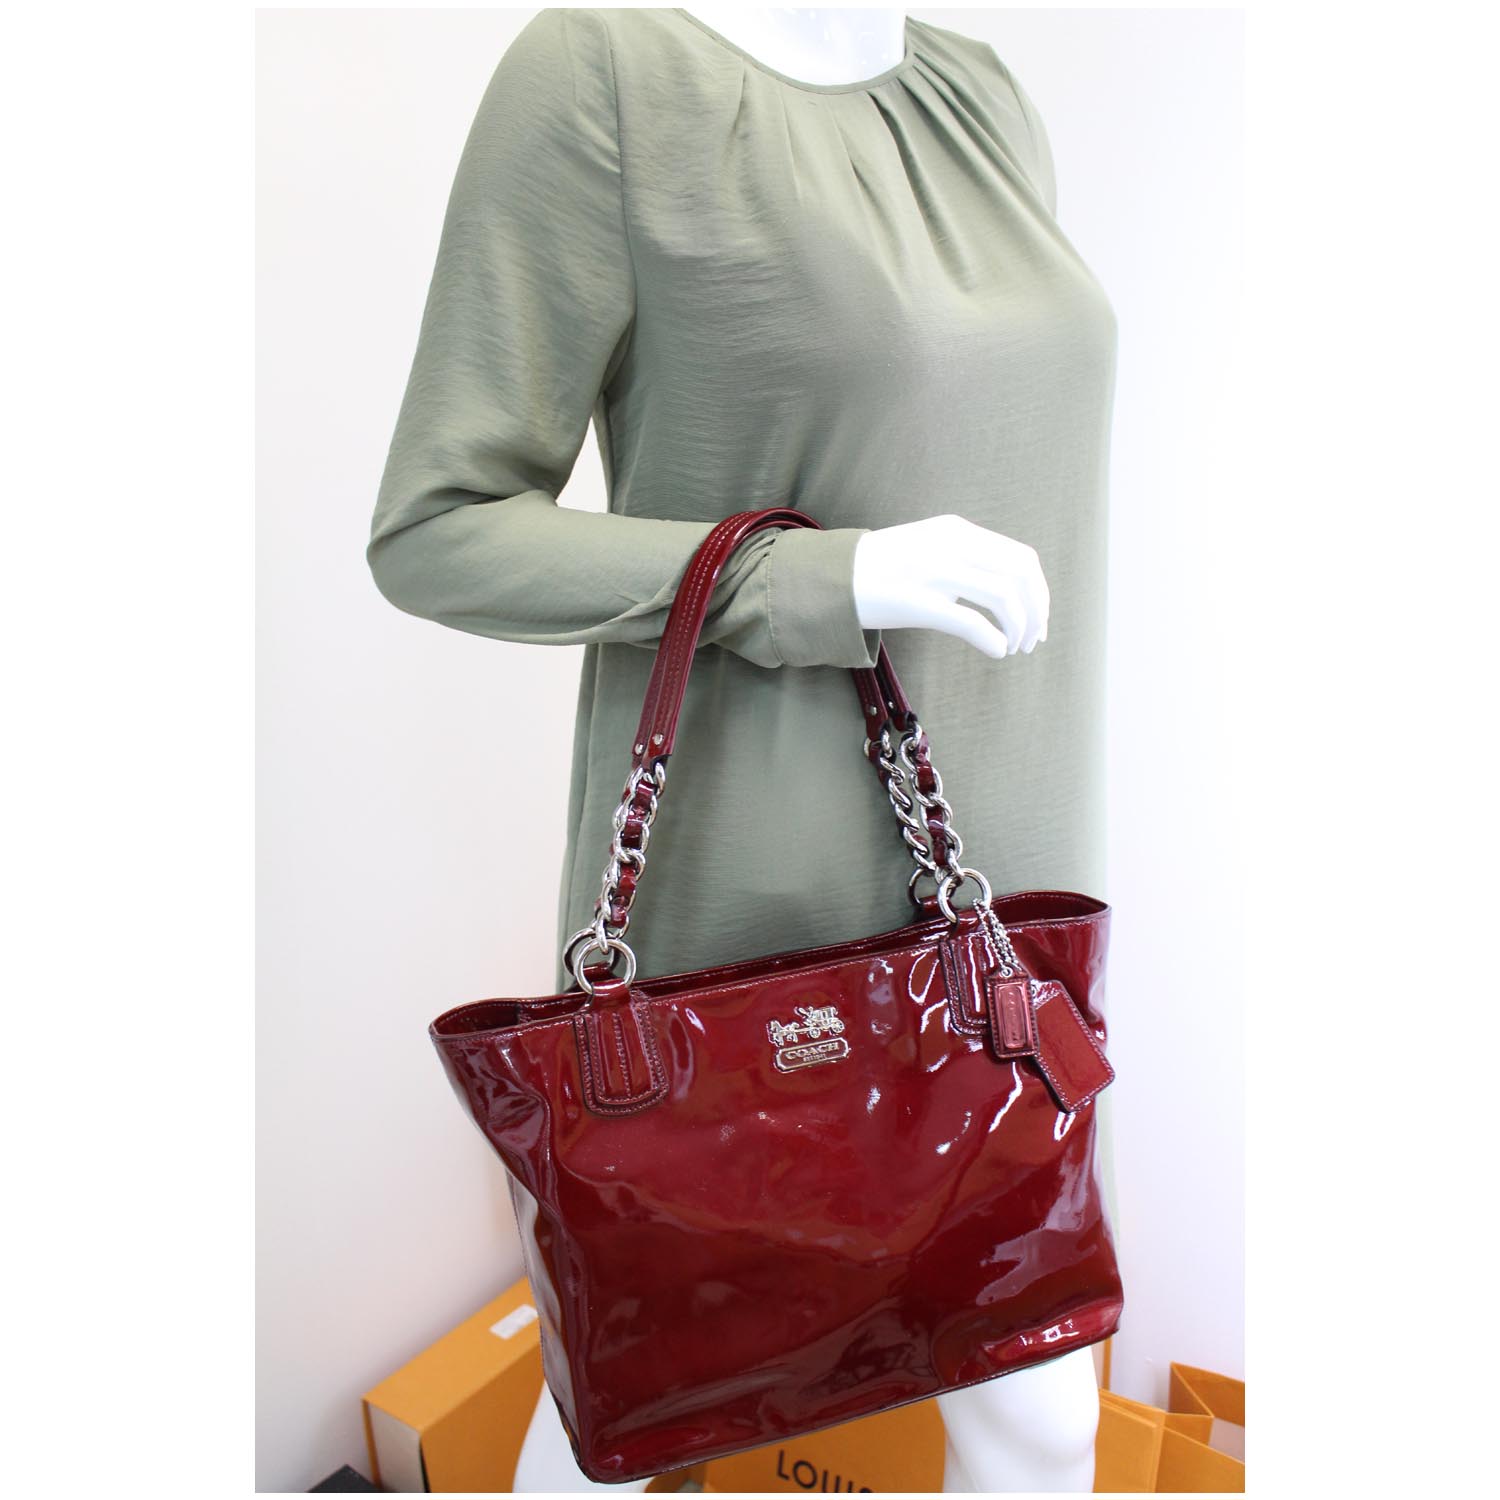 Leather Chain Bag, Red Patent, Shoulder Bags